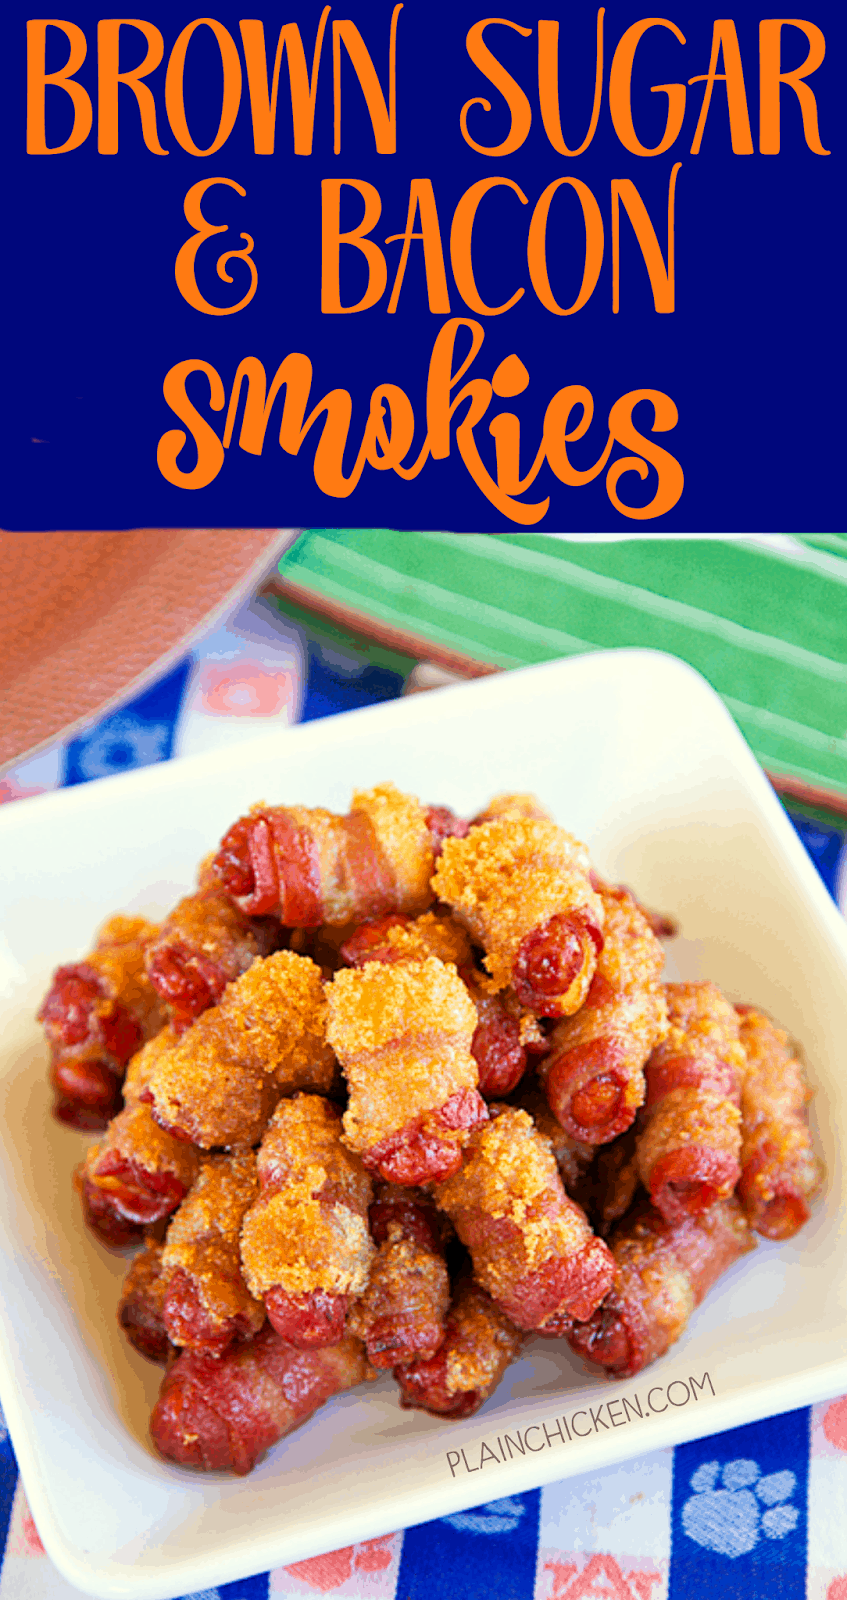 Brown Sugar and Bacon Smokies - only 3 ingredients and ready in under 30 minutes! These things fly off the plate at parties. I always double the recipe. SO GOOD!!!